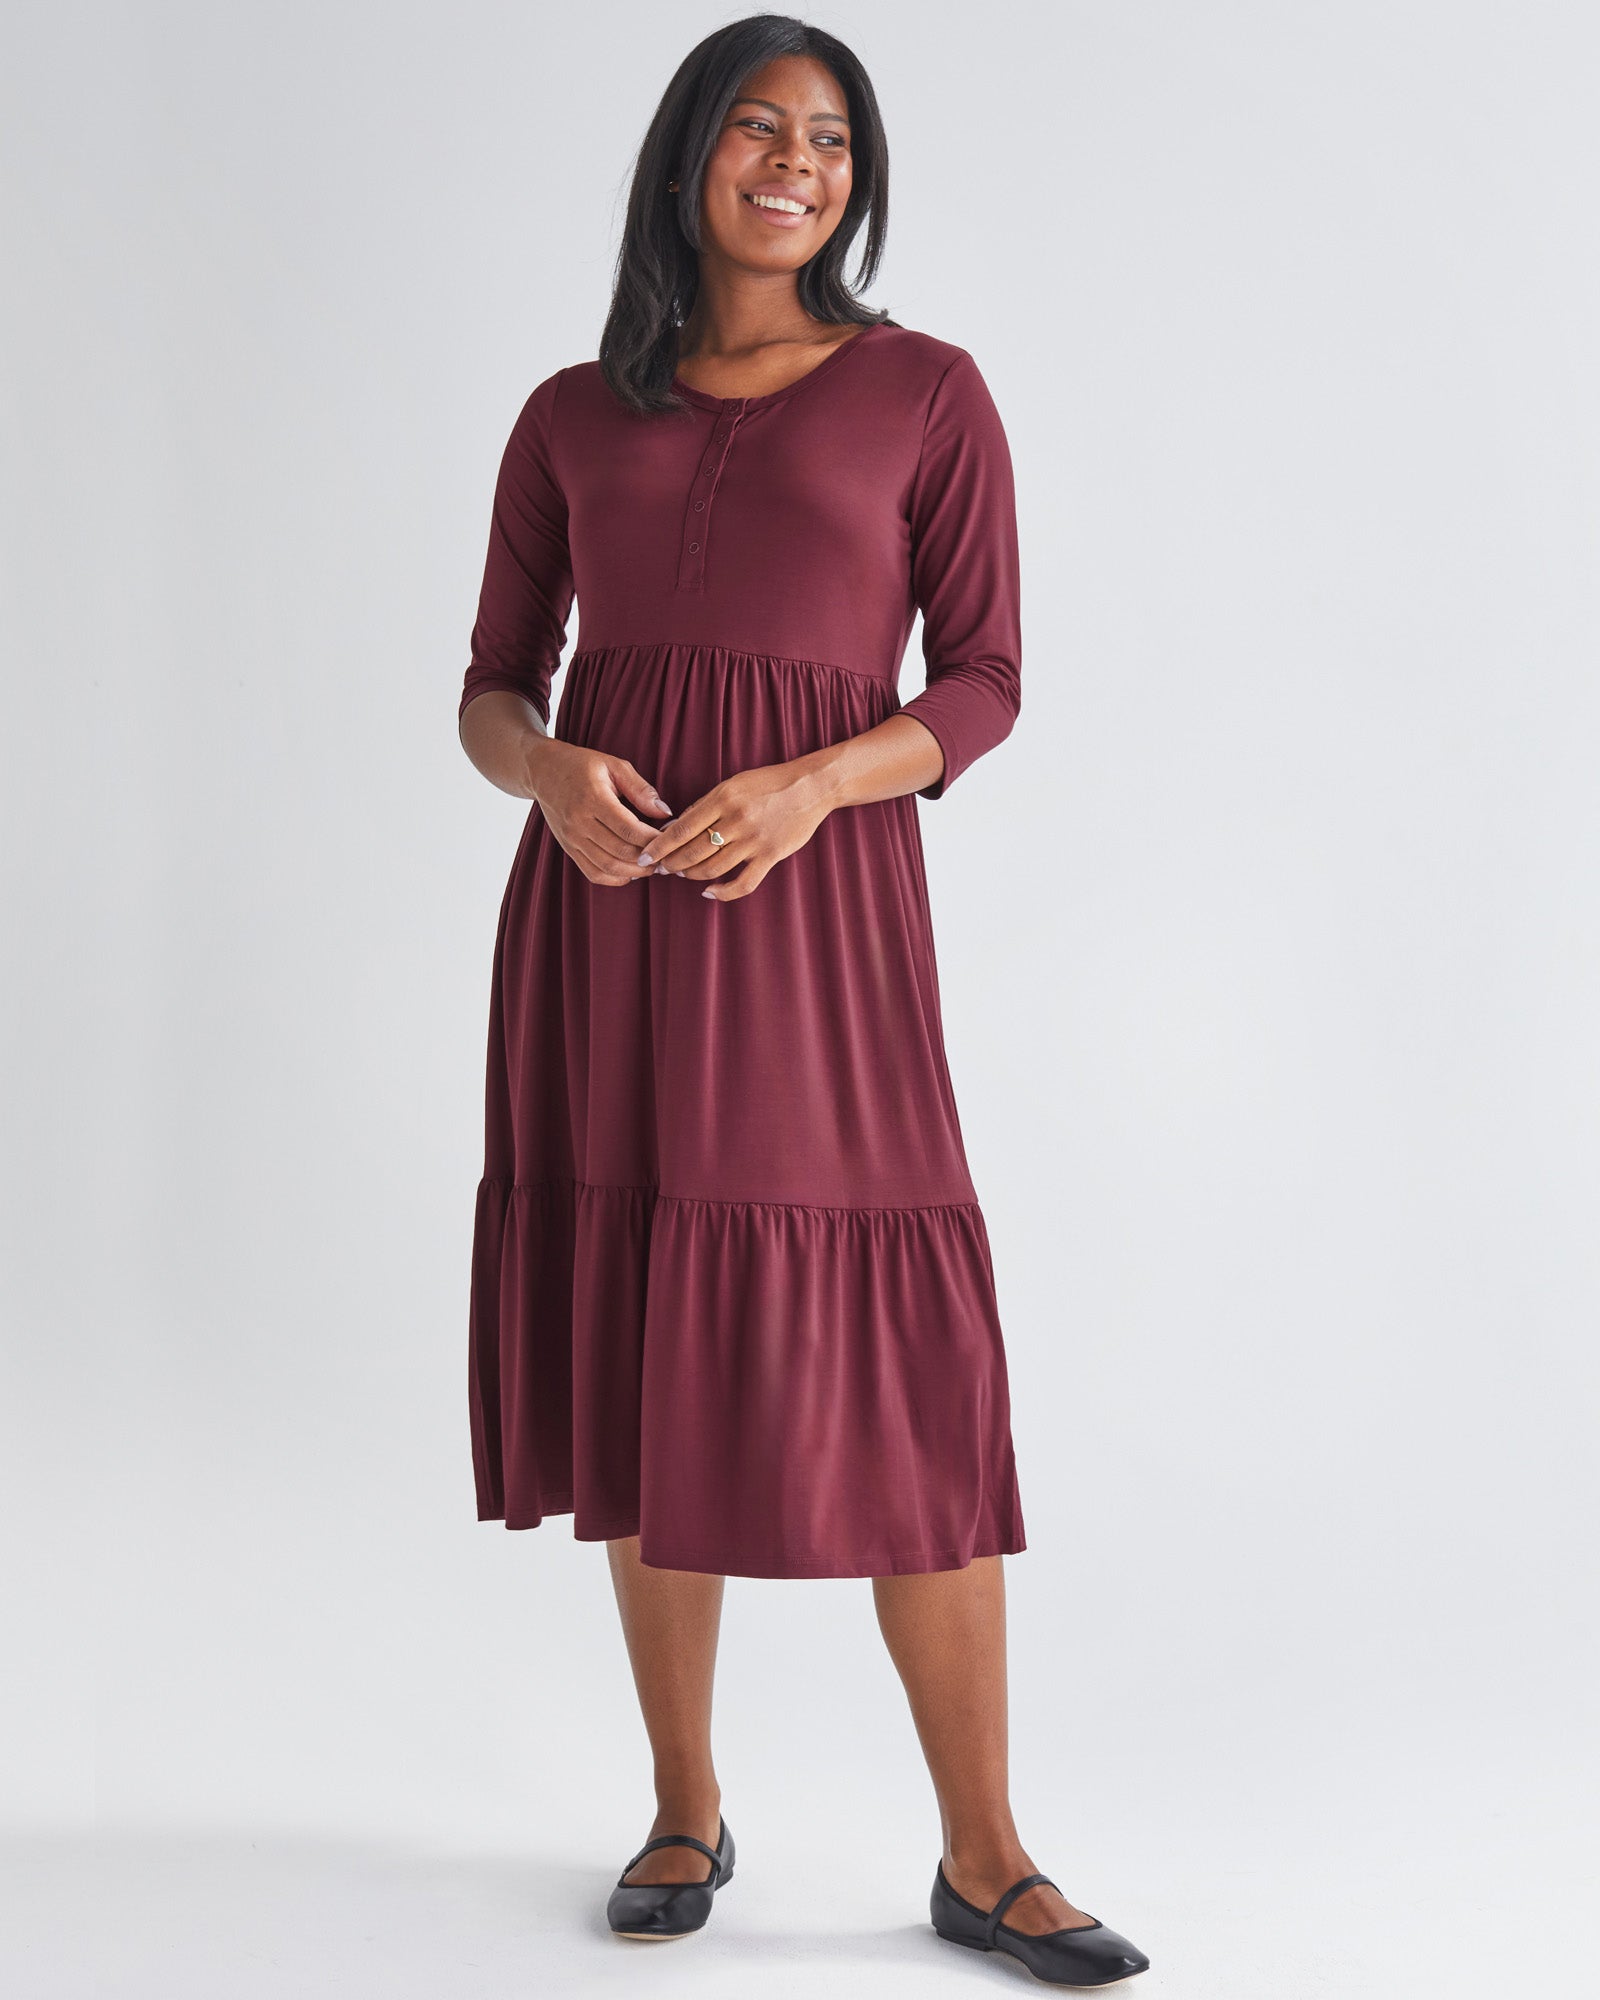 A Pregnannt Woman Wearing Tiered Maternity Midi Dress in Burgundy from Angel Maternity.